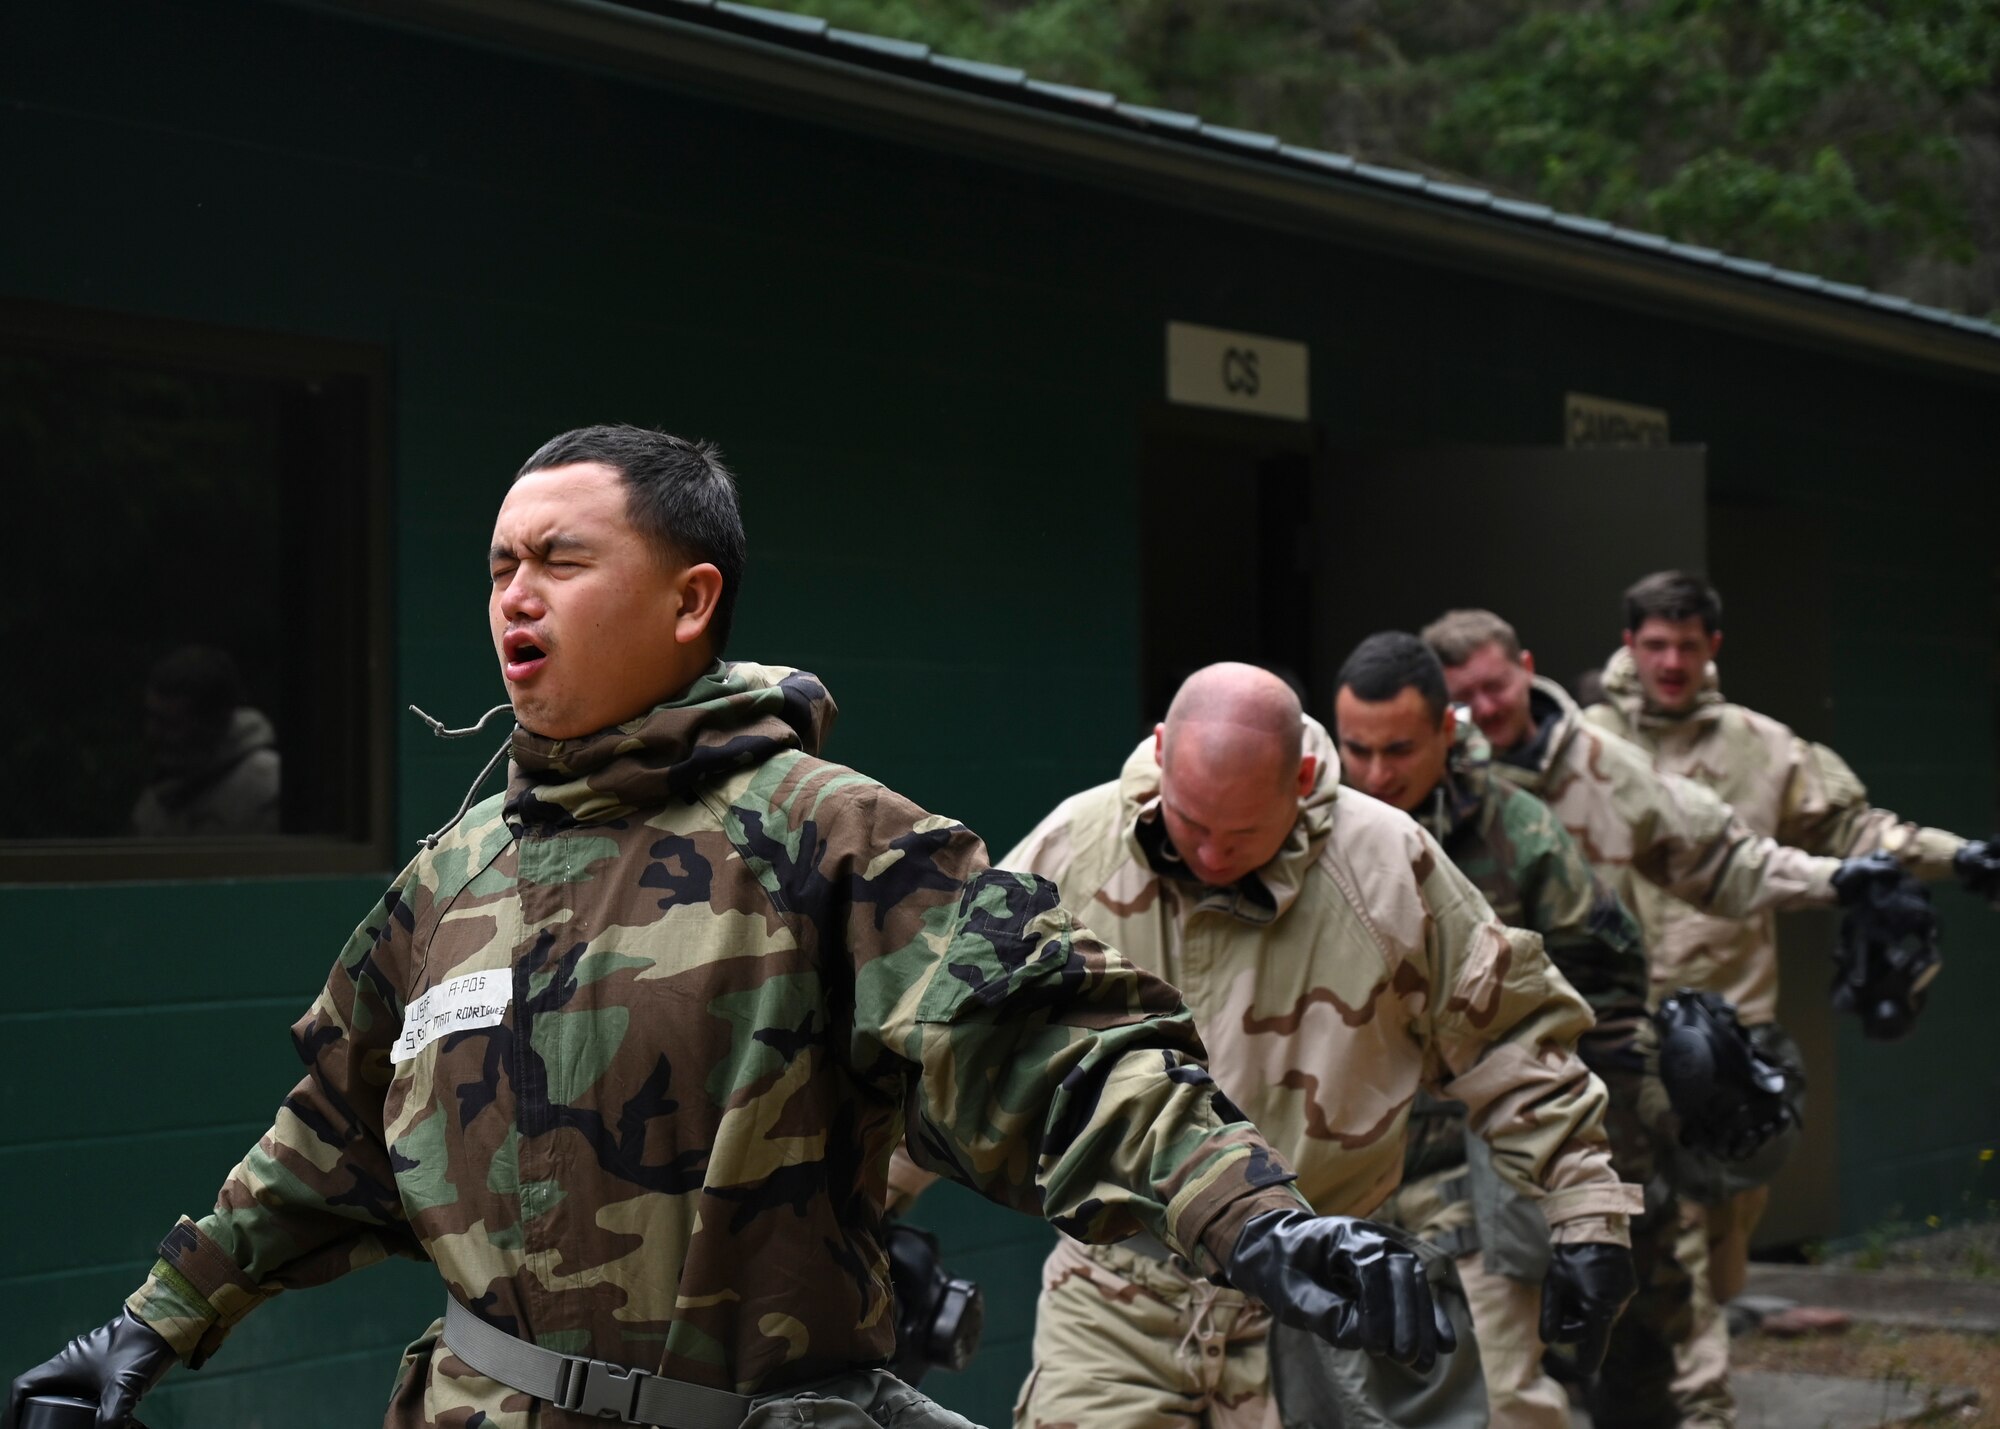 U.S. Air Force Airmen with the 627th Civil Engineer Squadron exit the gas chamber during a joint exercise at Joint Base Lewis-McChord, Washington, Aug. 26, 2022. The 627th CES partnered with the 349th Chemical Company for a chemical, biological, radiological, and nuclear exercise to ensure Airmen are proficient in using a gas mask to prepare them for a biological or chemical attack. (U.S. Air Force photo by Senior Airman Callie Norton)